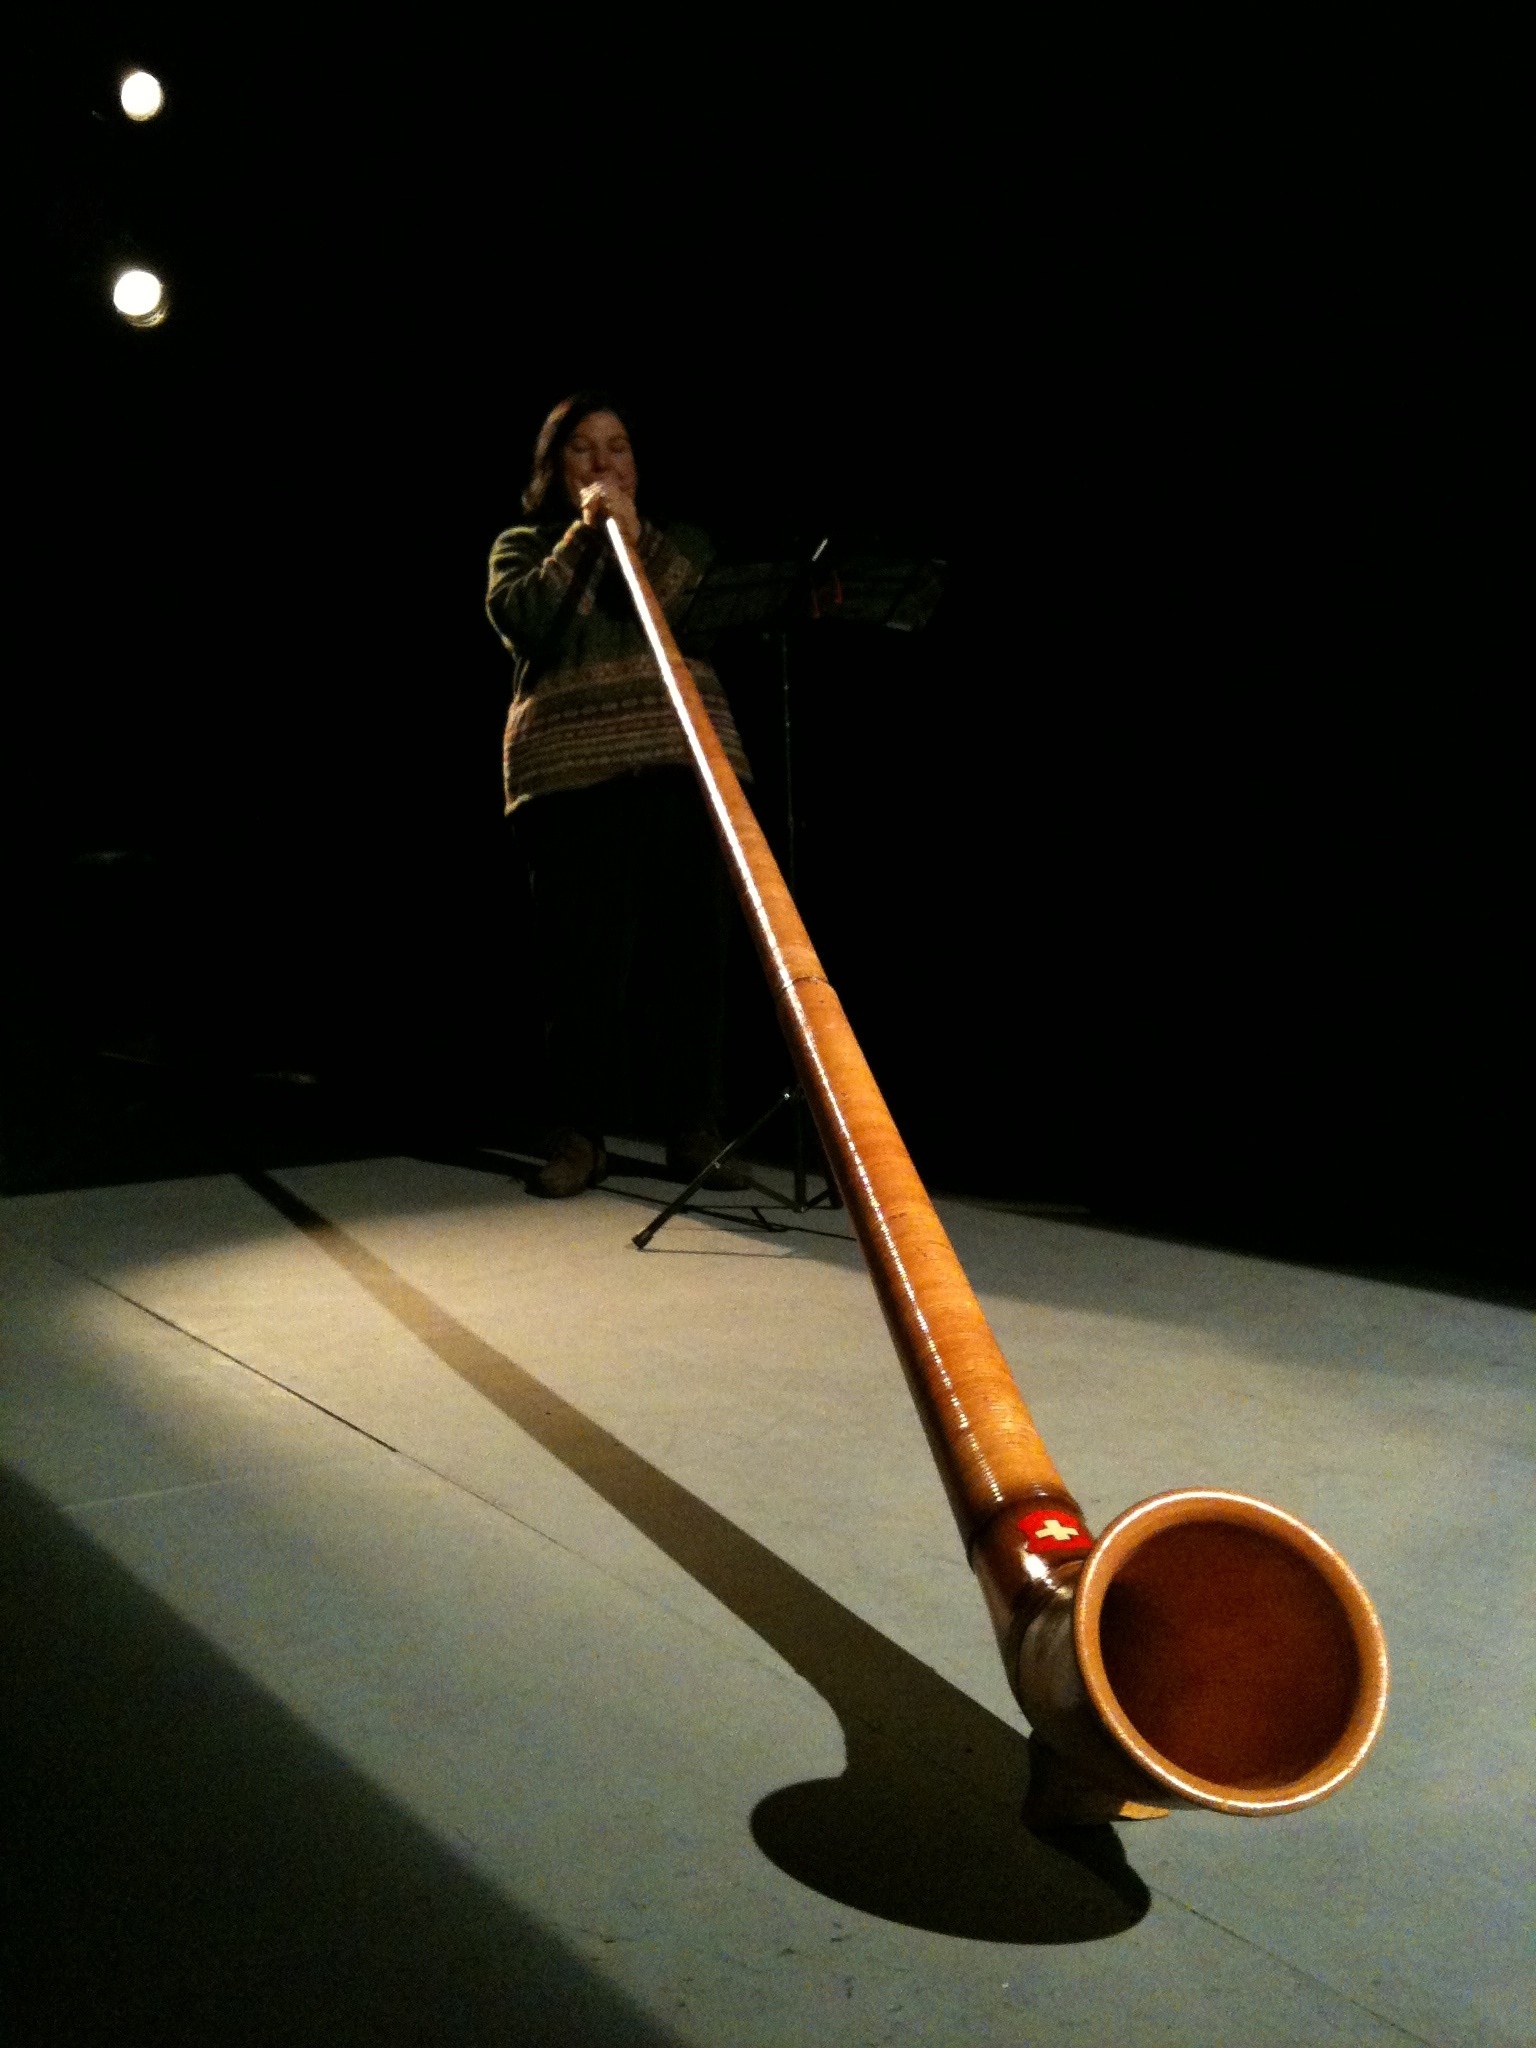 Alphorn: Live alphorn music, Used by mountain dwellers in the Swiss Alps, 2010 festival stop, NYC. 1540x2050 HD Wallpaper.